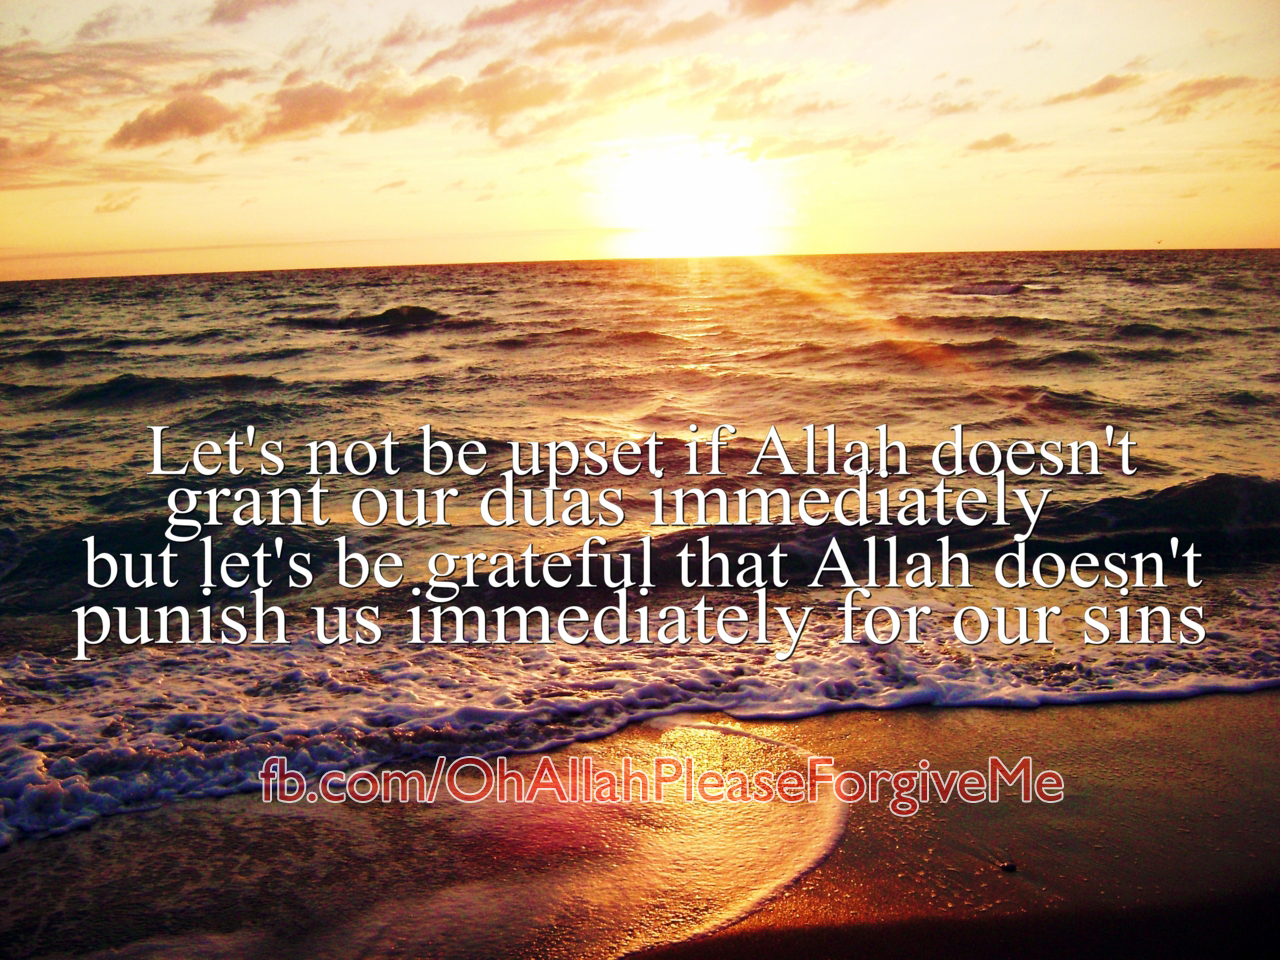 Letu2019s not be upset if Allah doesnu2019t :: Islamic Quotes | Top Beautiful